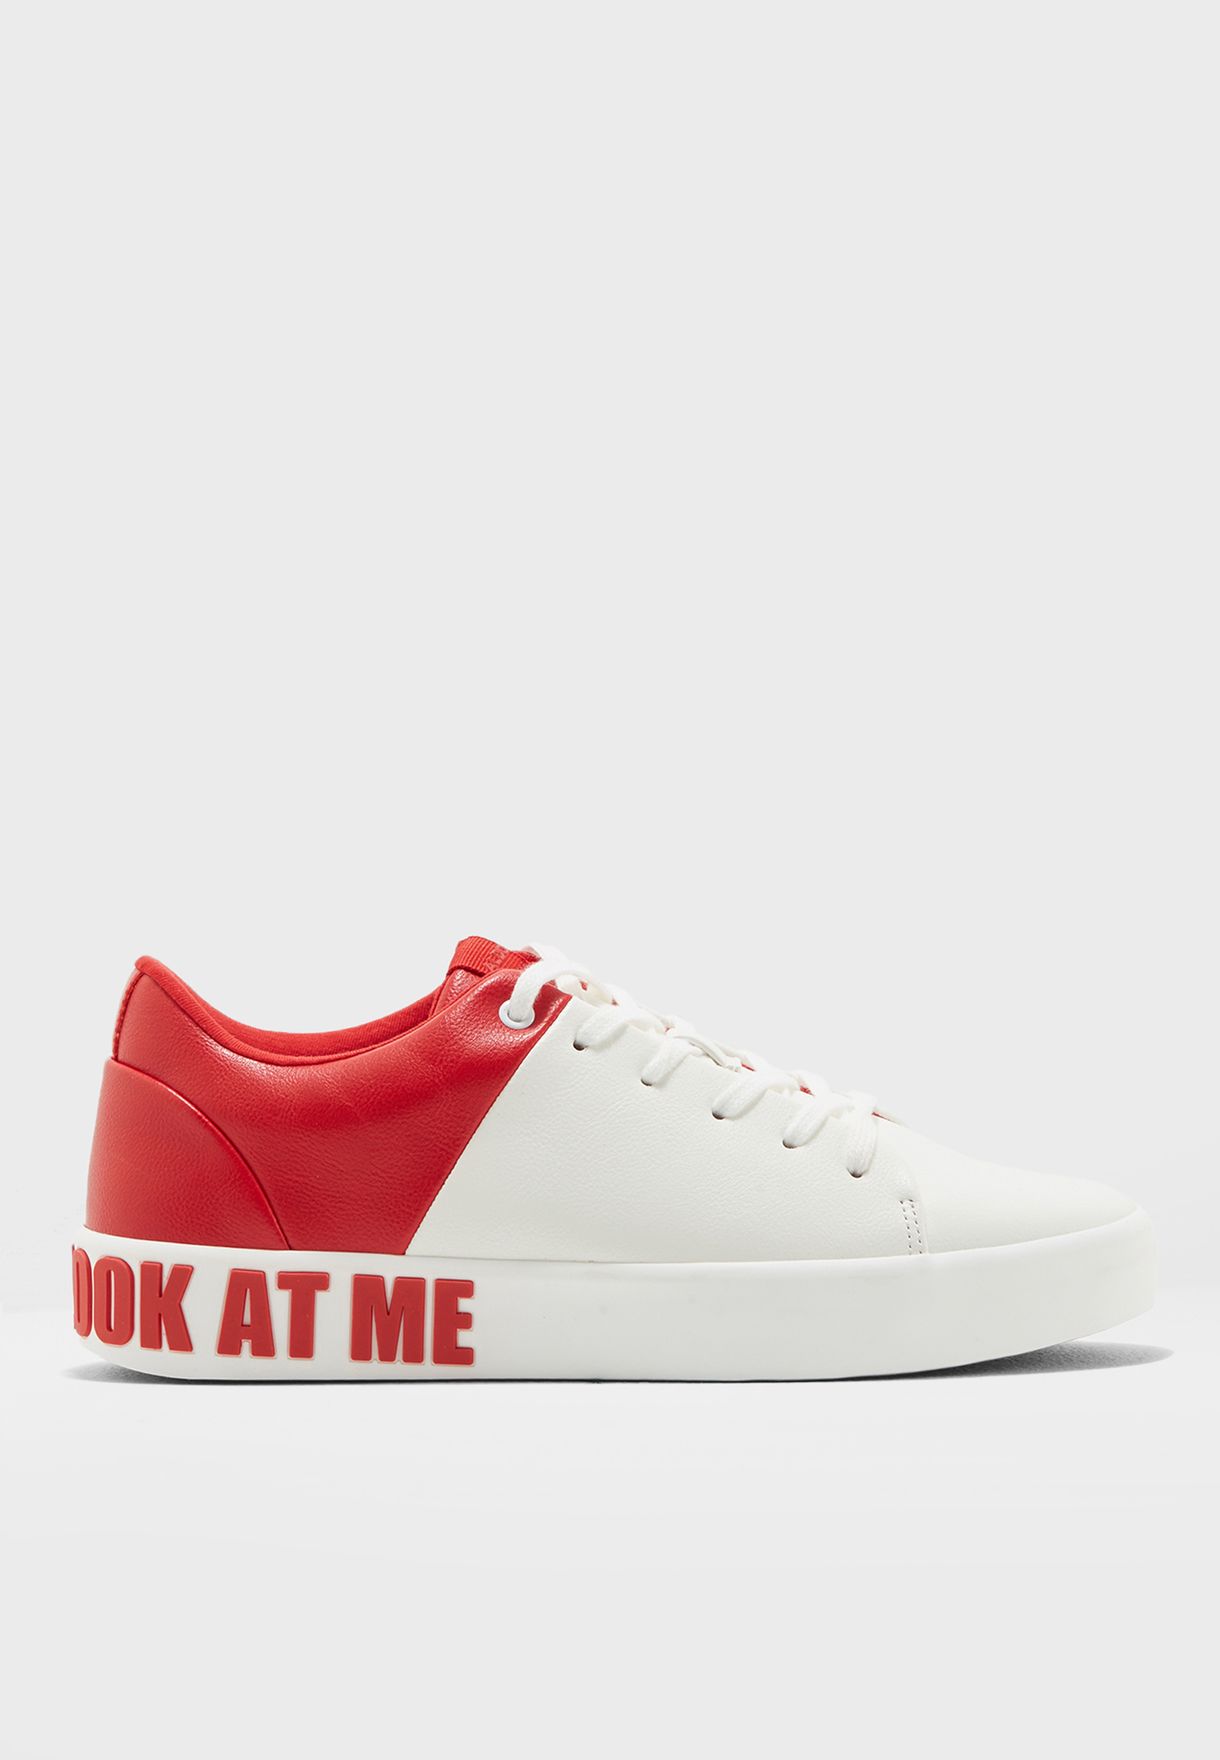 aldo shoes red sneakers